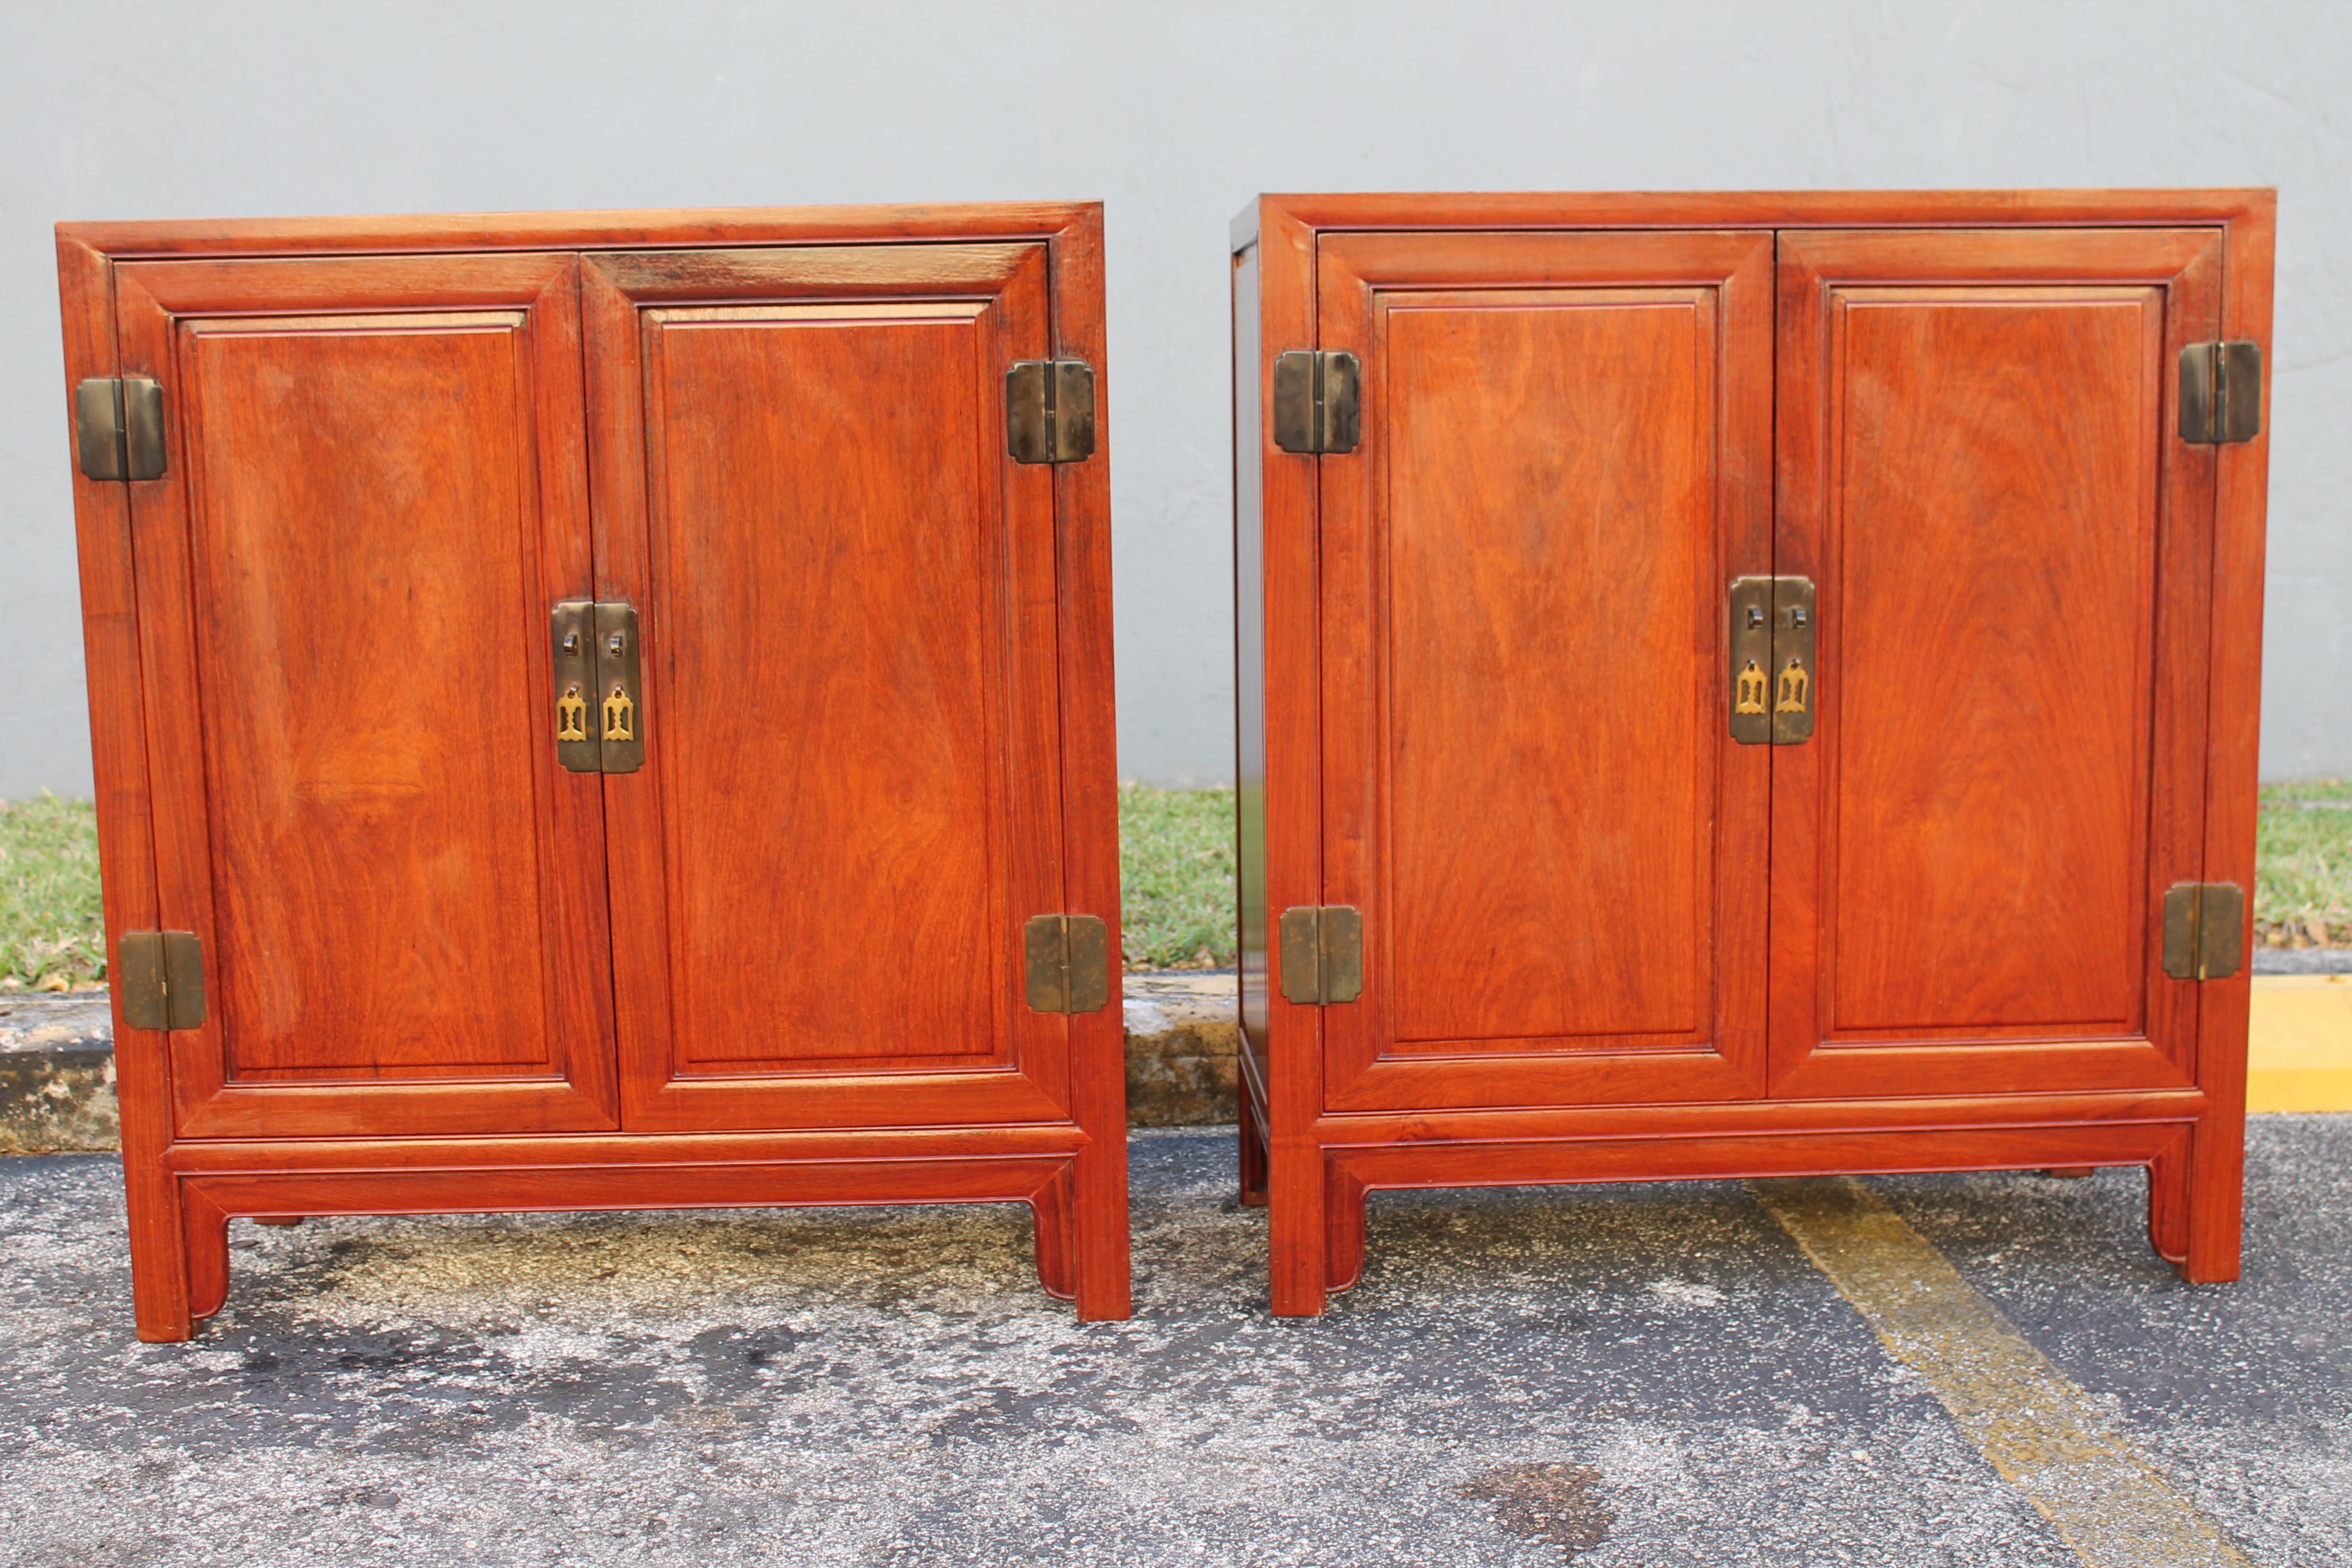 Pair Mid Century Modern Large Bachelors Chests/ Night Stands. Beautiful brass hardware. Opens to reveal a full bank of drawers. Great elegant storage.